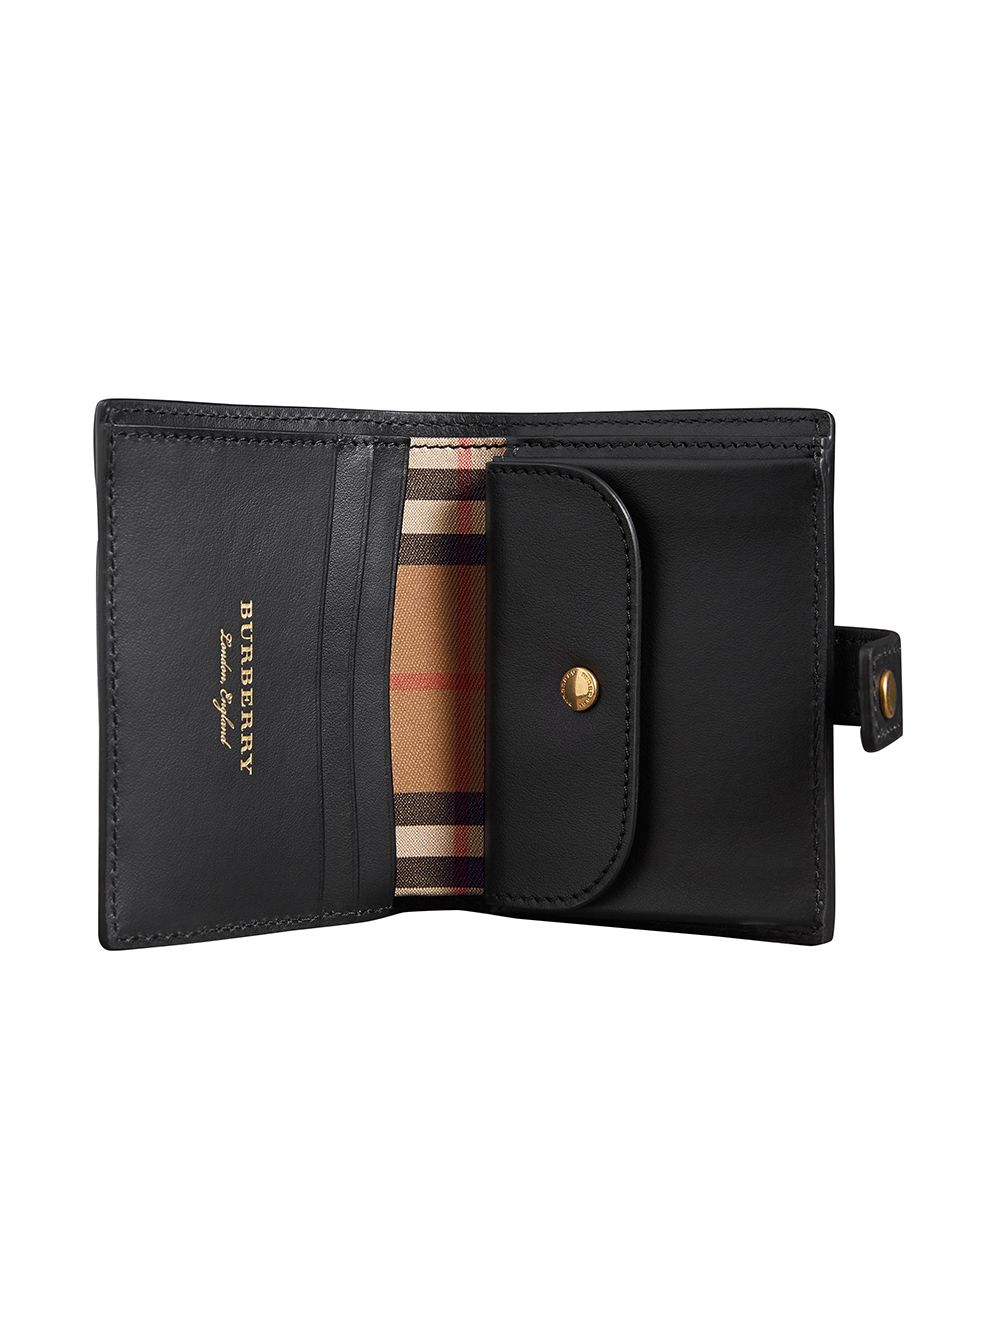 Burberry Small Vintage Check Wallet - Farfetch